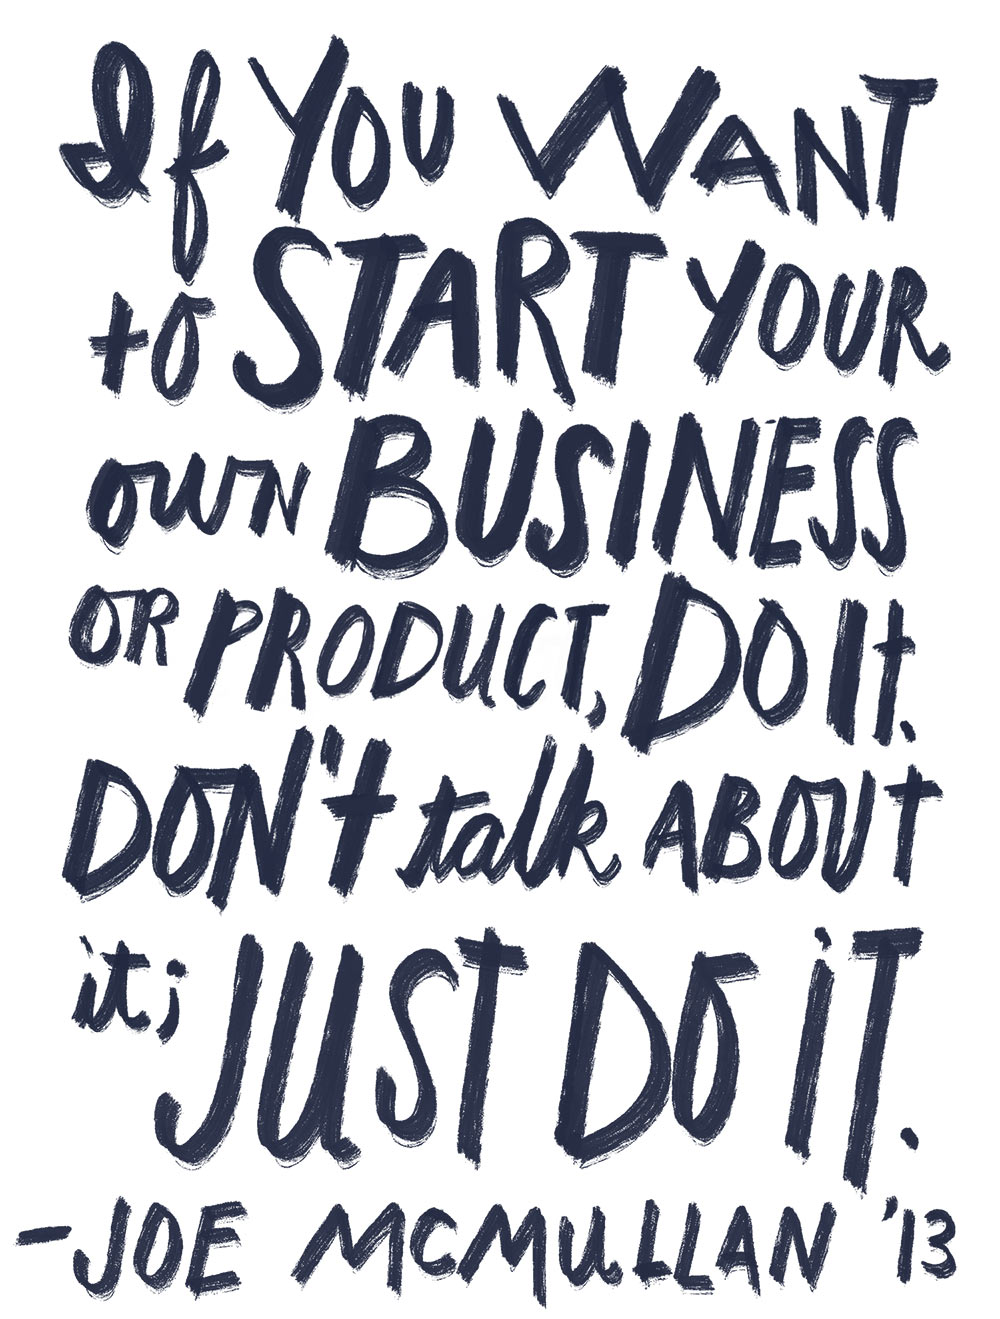 If you want to start your own business or product, do it; Don't talk about it, just do it.